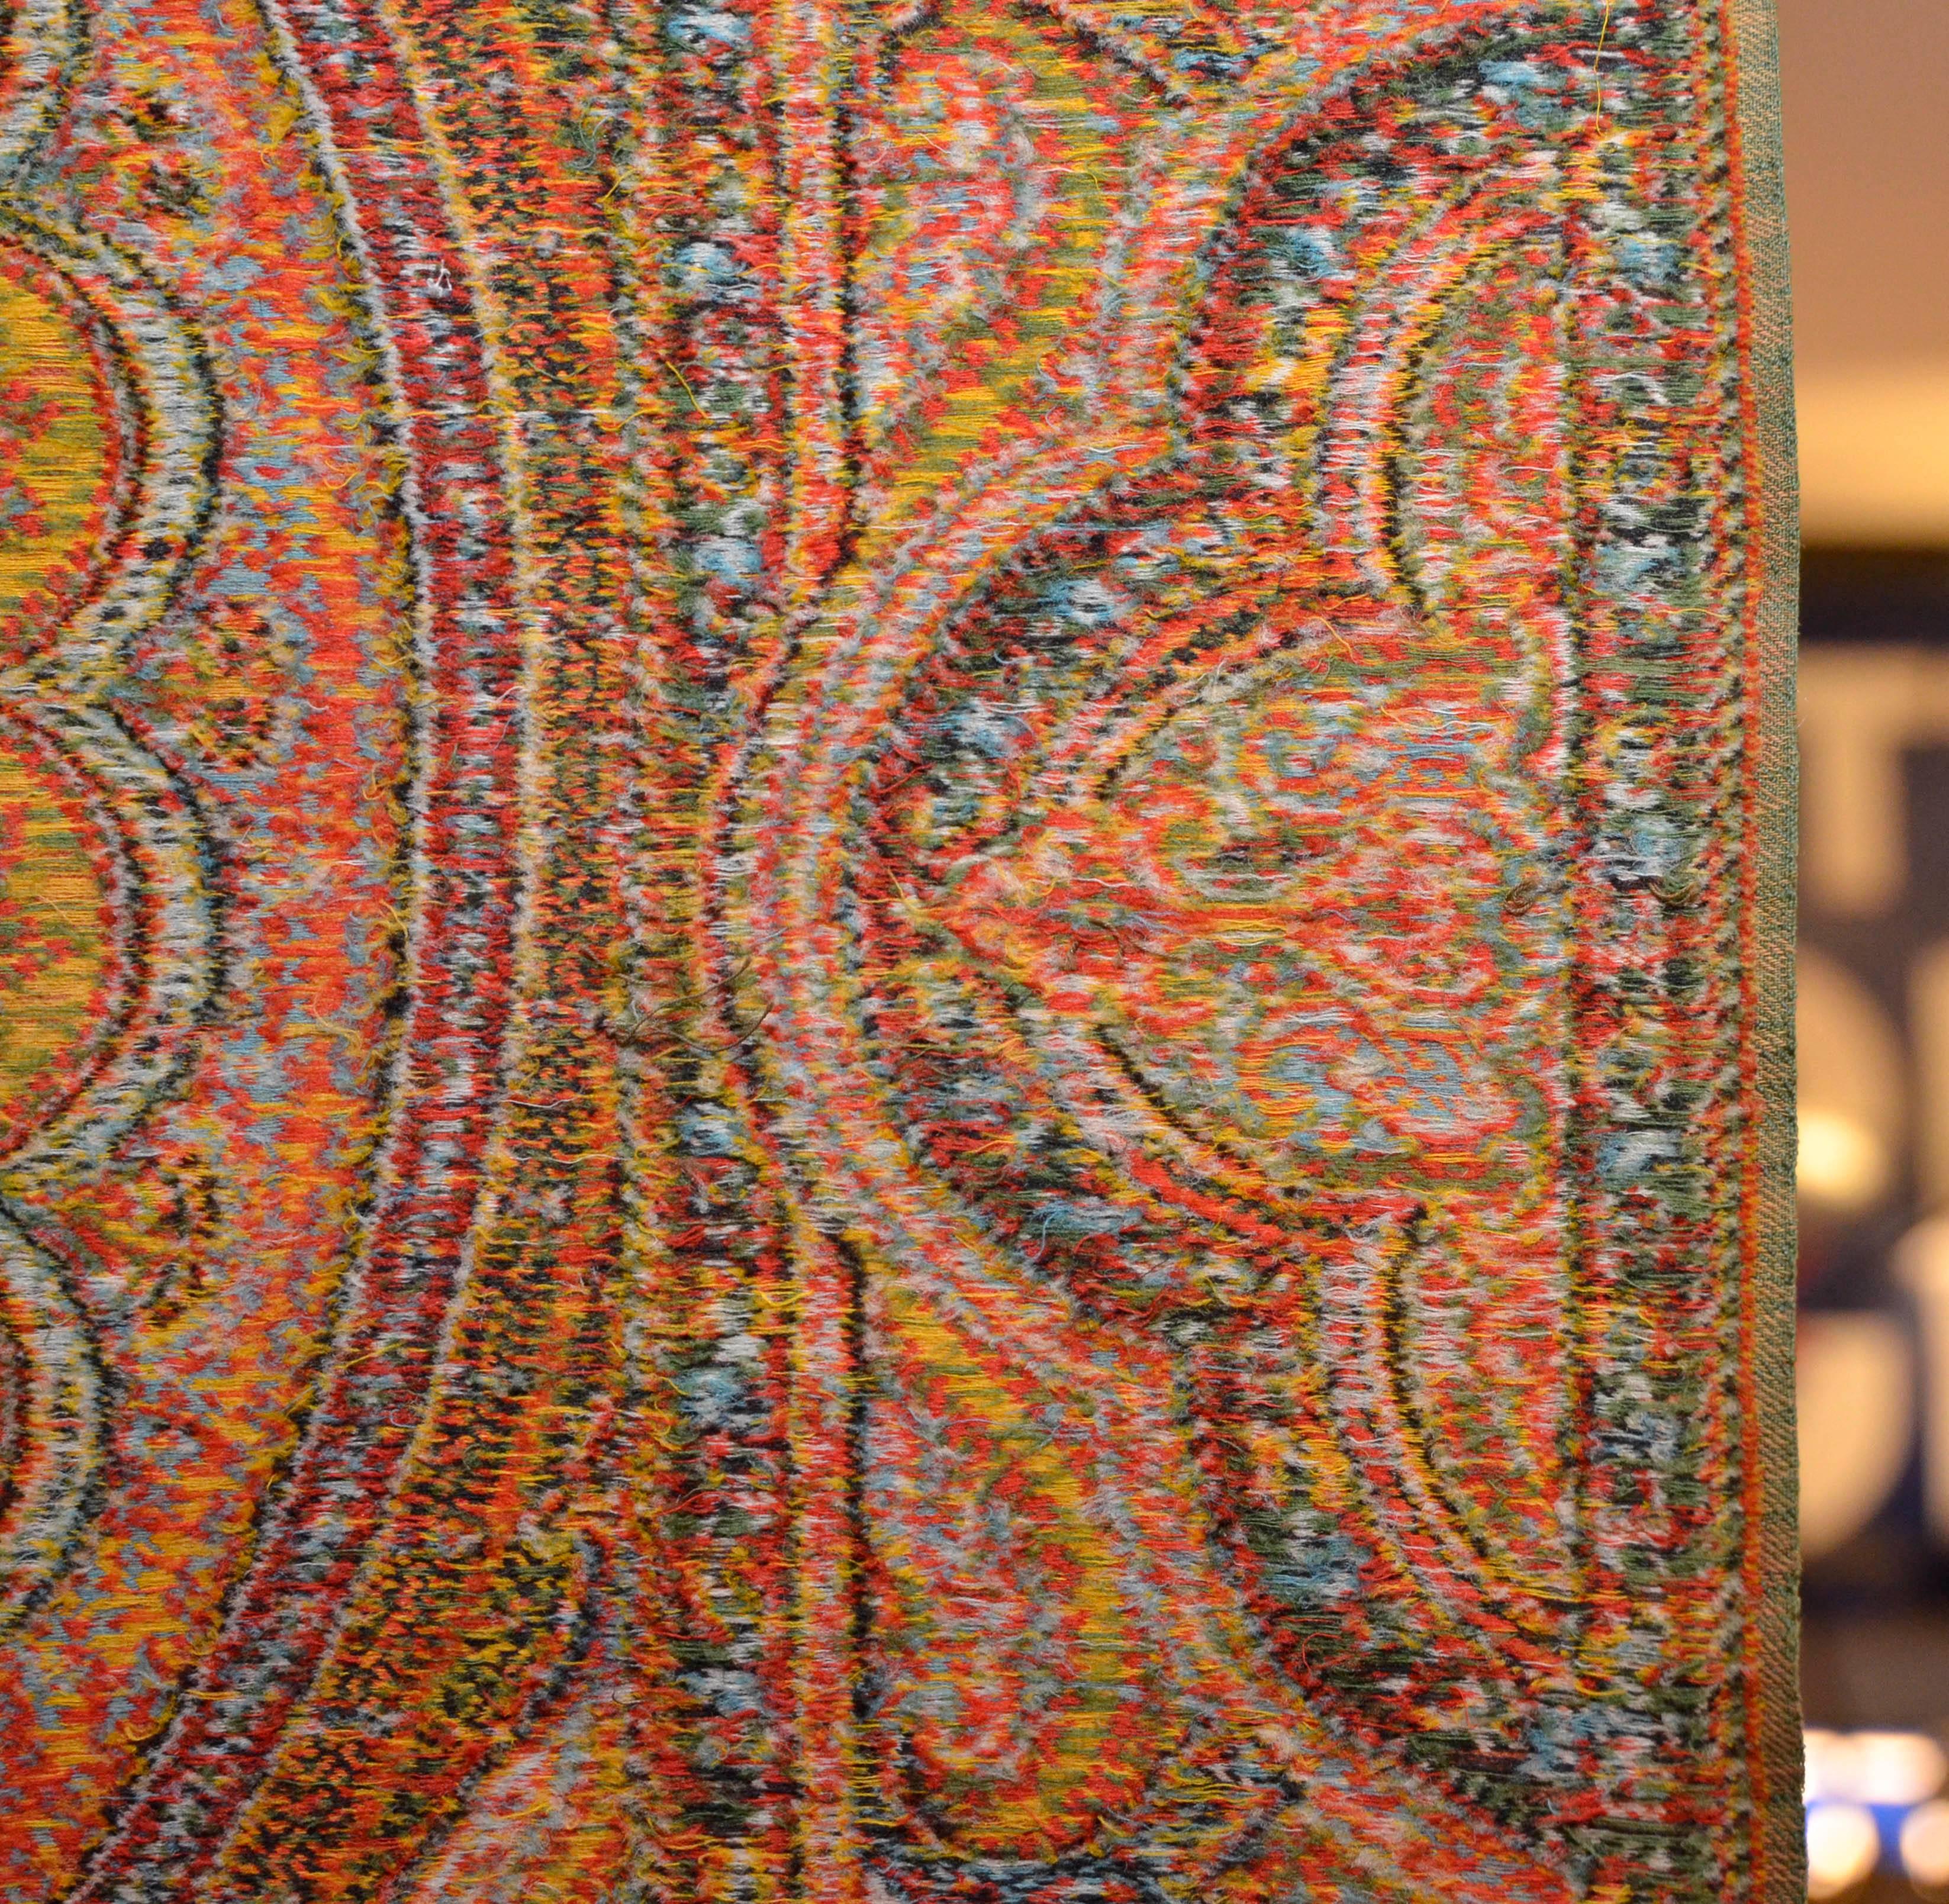 Hand-Woven Late 19th Century French Kashmir Paisley Shawl